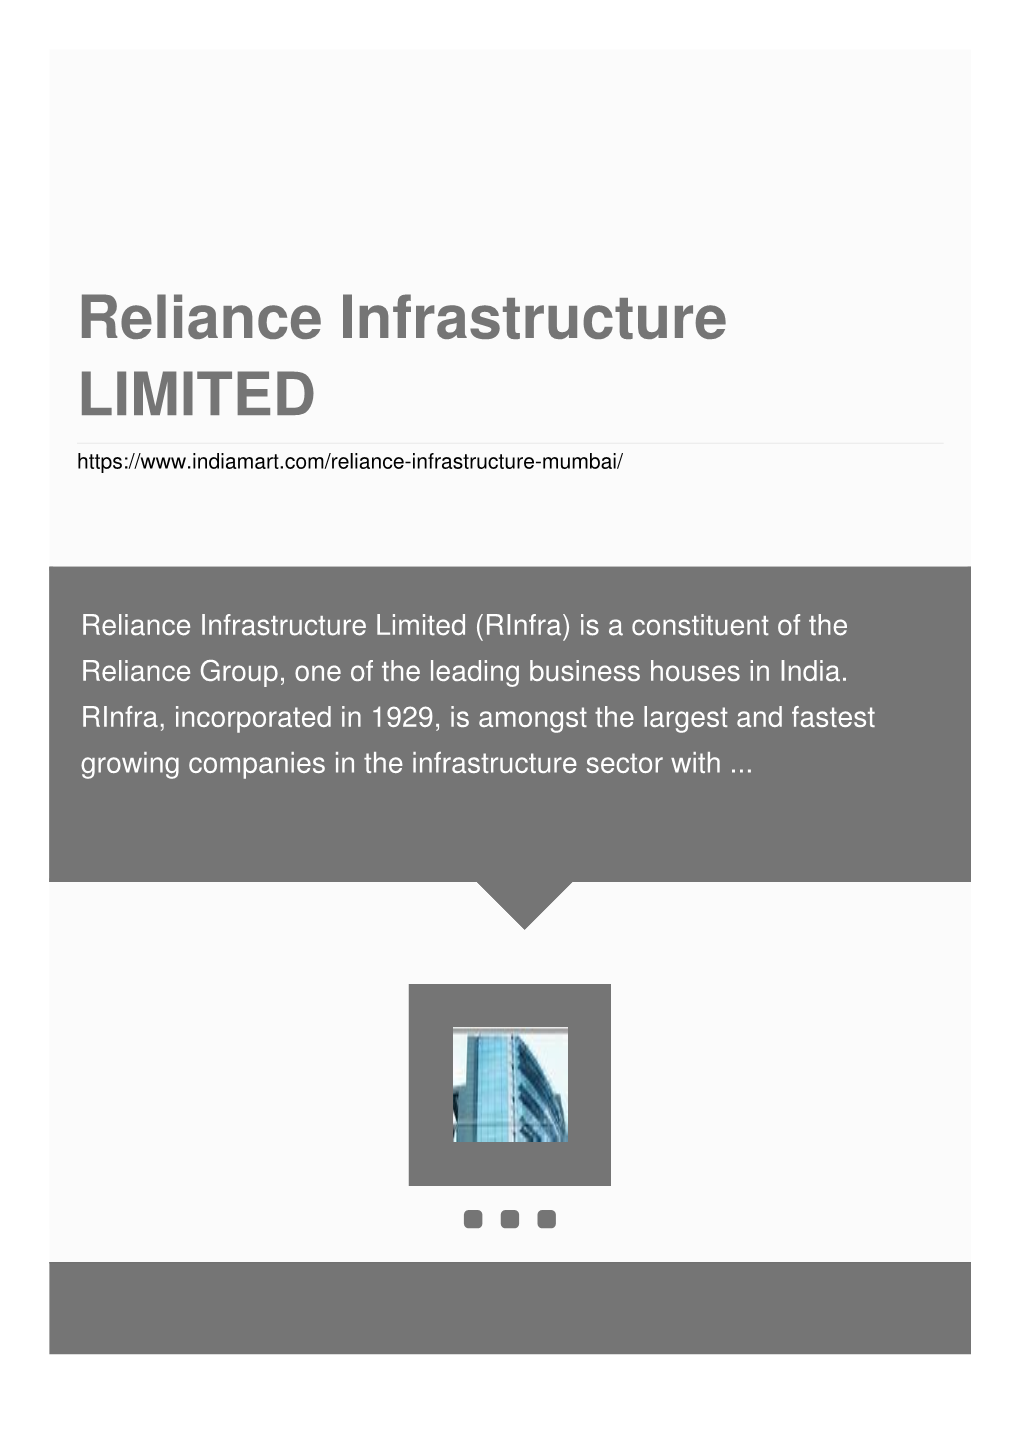 Reliance Infrastructure LIMITED